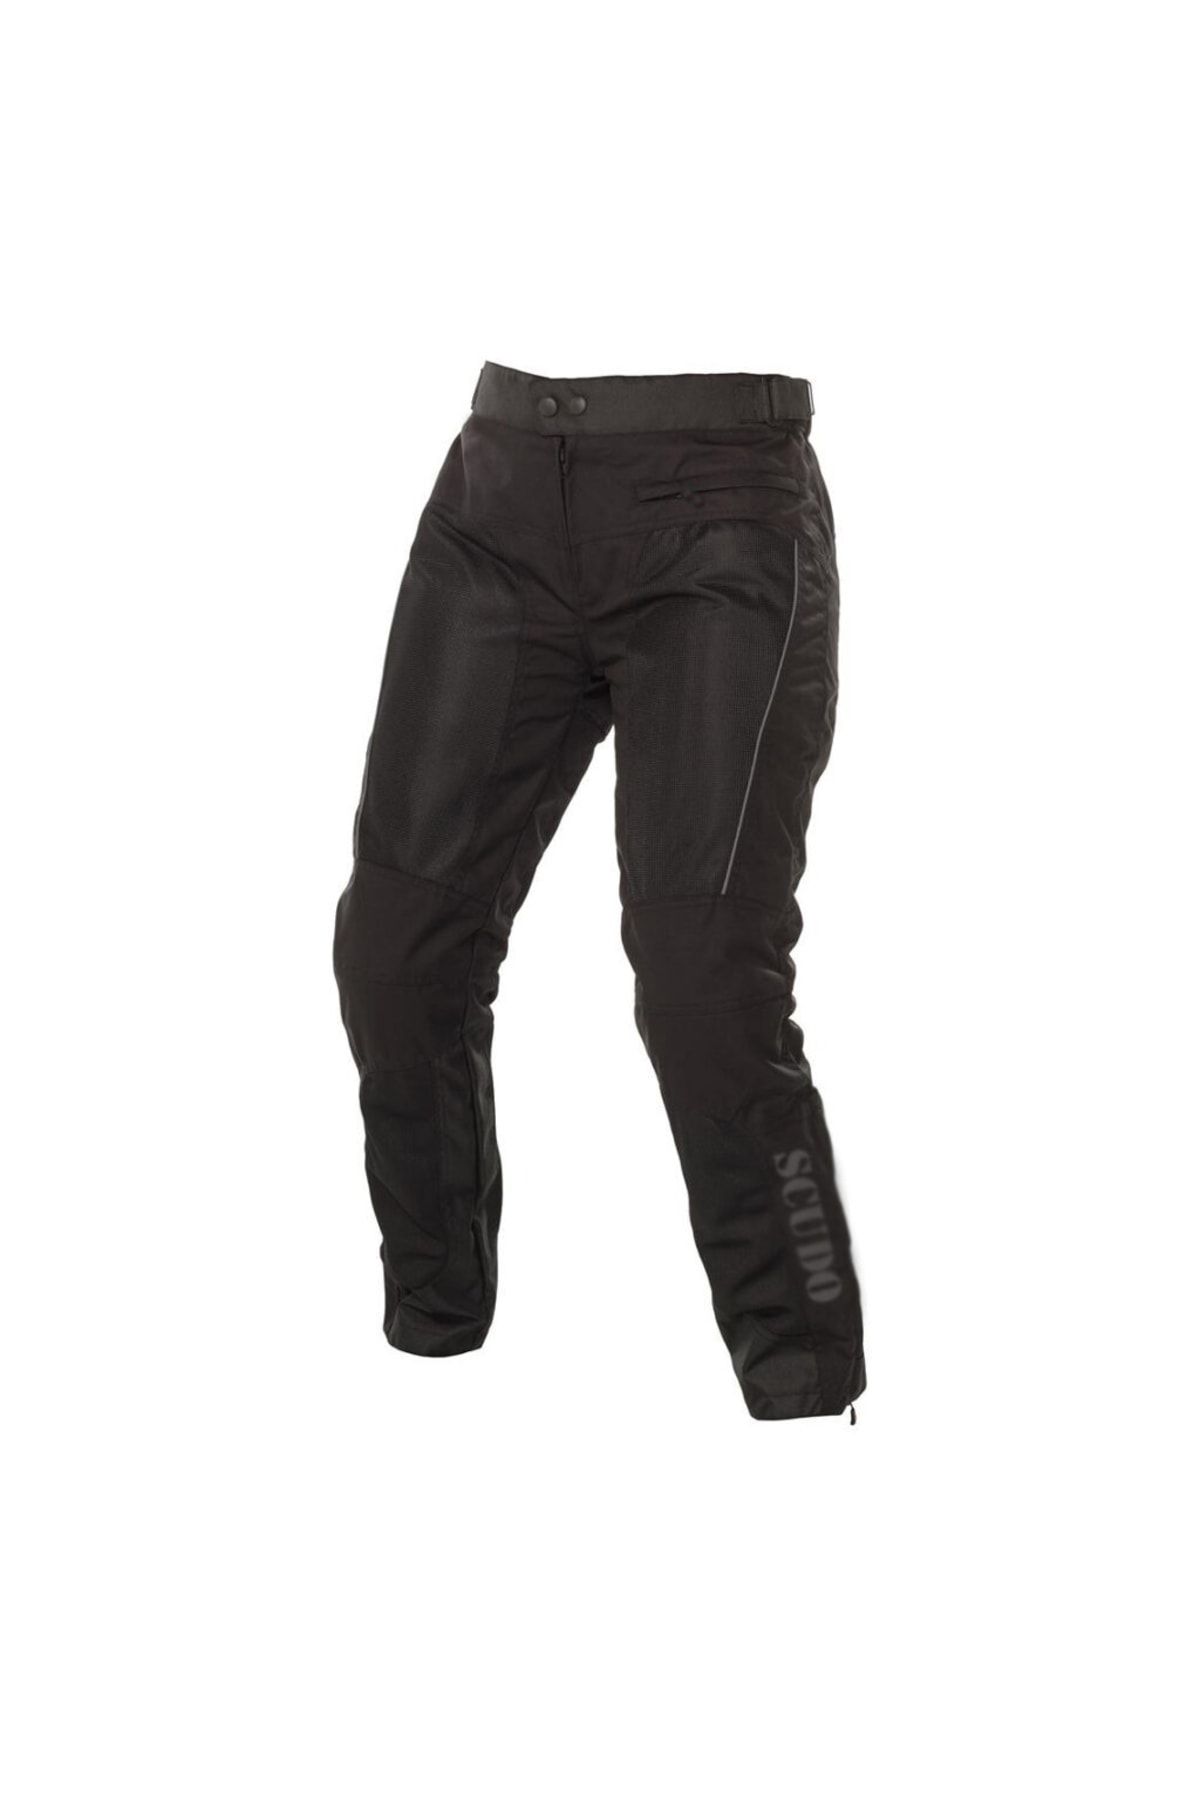 ION AIR Mesh Pant - Solace Motorcycle Clothing Co - Official Website